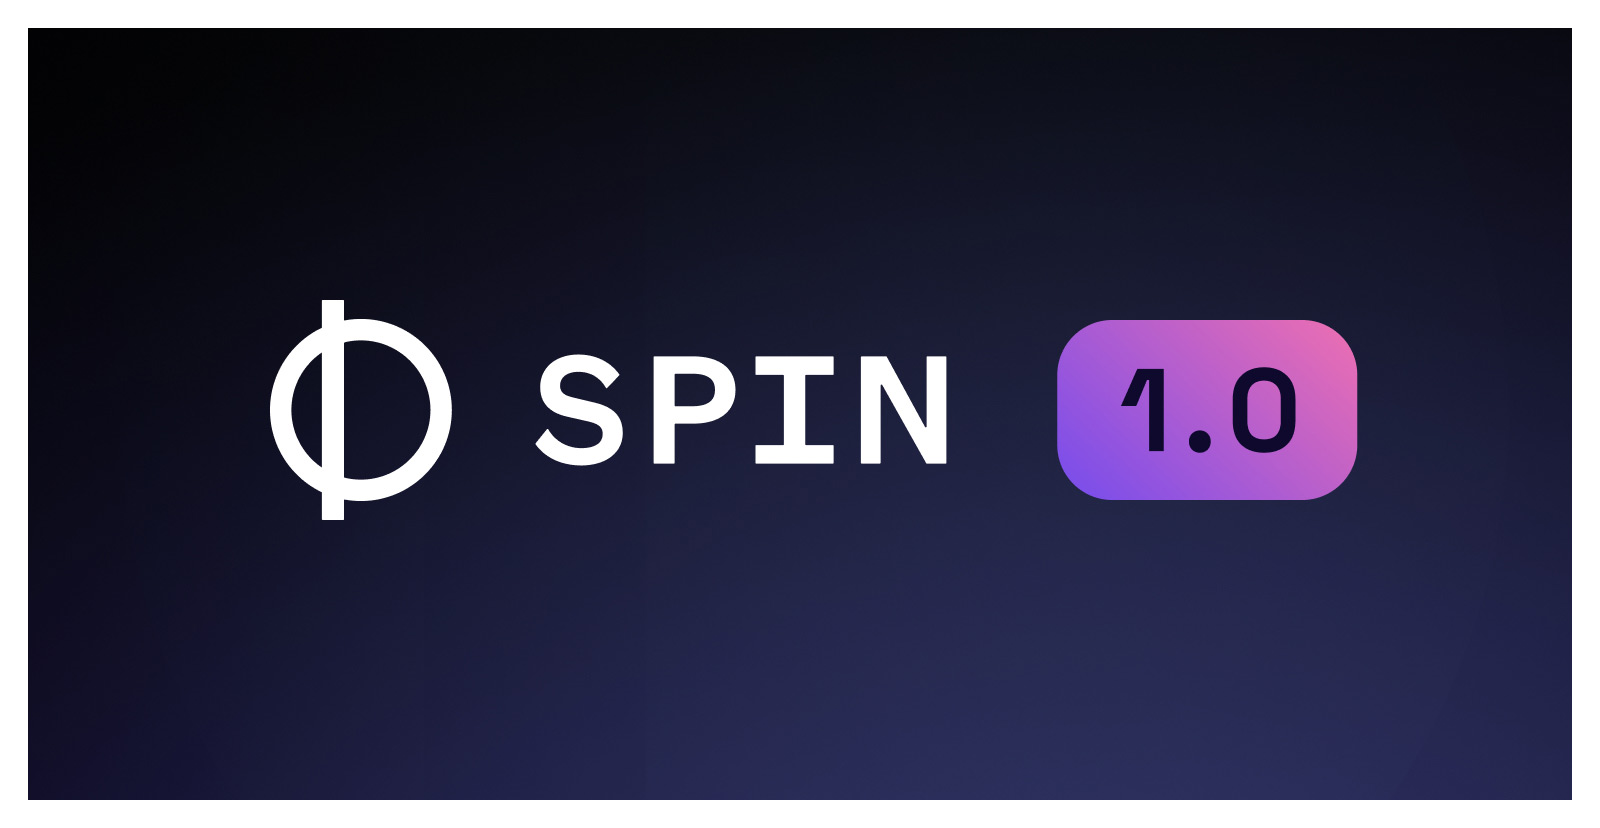 Announcing Spin 1.0